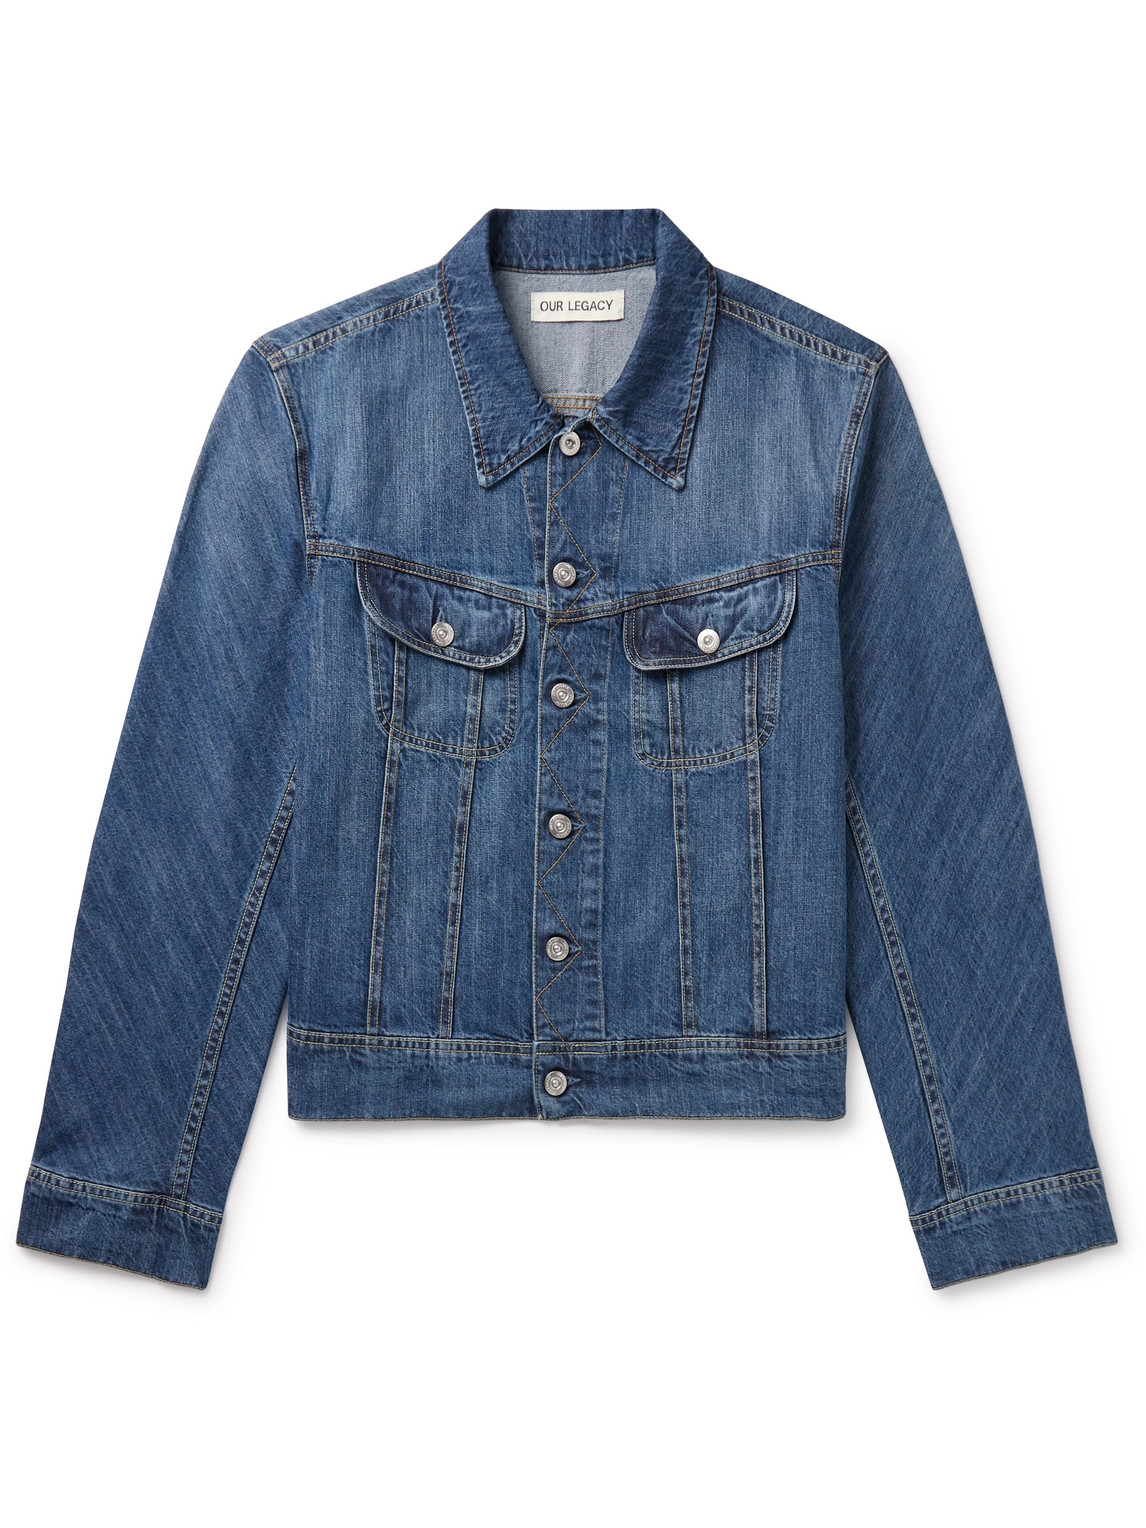 OUR LEGACY RODEO DENIM JACKET